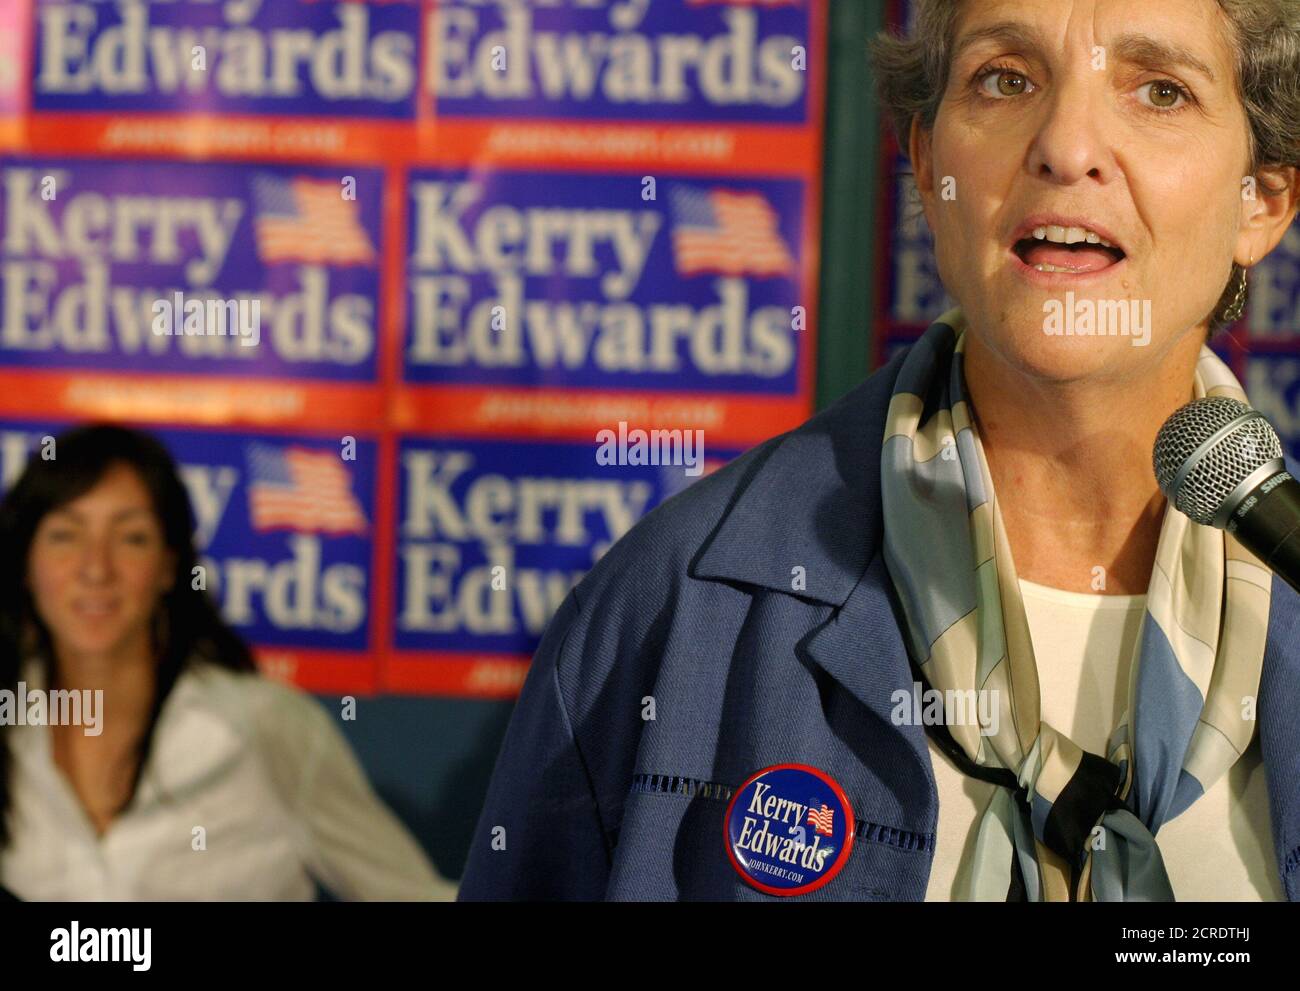 Diana Kerry, sister of U.S. presidential candidate John Kerry and chair of the grassroots organization Americans Overseas for Kerry-Edwards (AOK), answers media questions during a publicity event at an internet cafe in Madrid September 10, 2004. Kerry is on an international tour to encourage U.S. citizens living abroad to vote and to introduce them to a new internet-based voter registration application. REUTERS/Susana Vera  SV/ACM Stock Photo